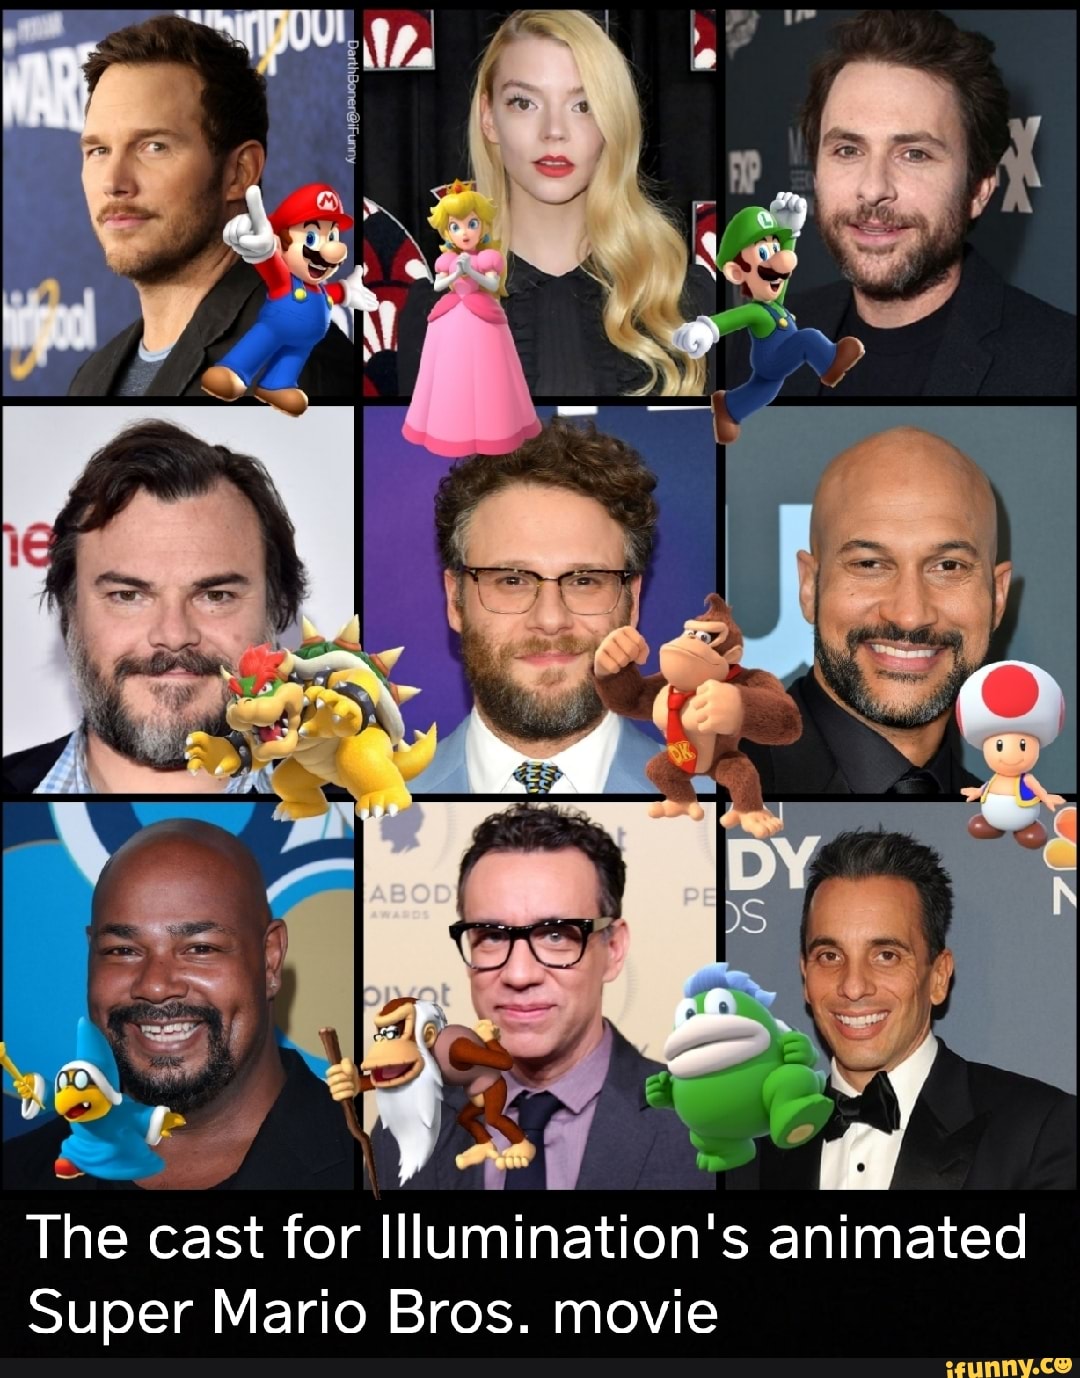 Post Credits Character Fan Casting for The Super Mario Bros. Movie